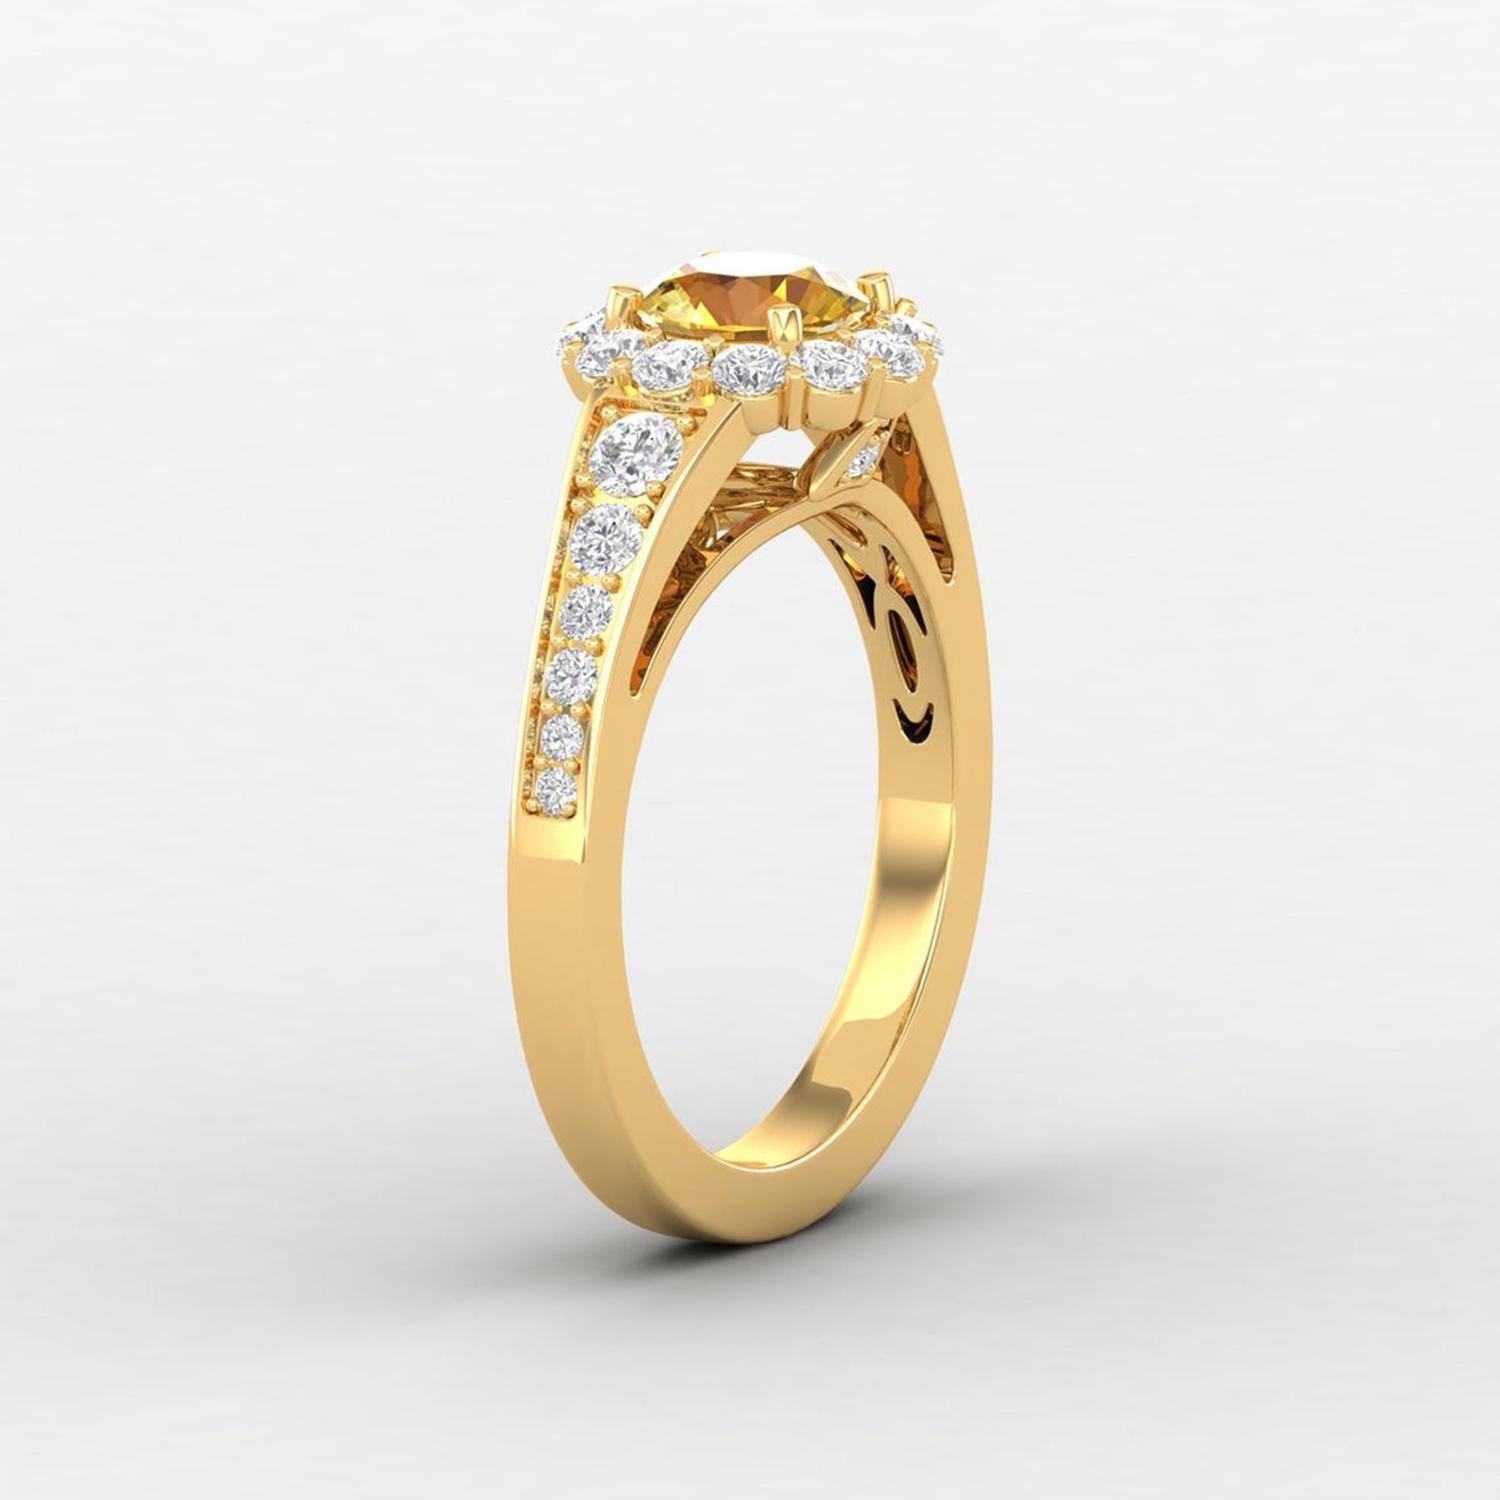 Round Cut 14 Karat Gold Sapphire Ring / Round Diamond Ring / Solitaire Ring For Sale